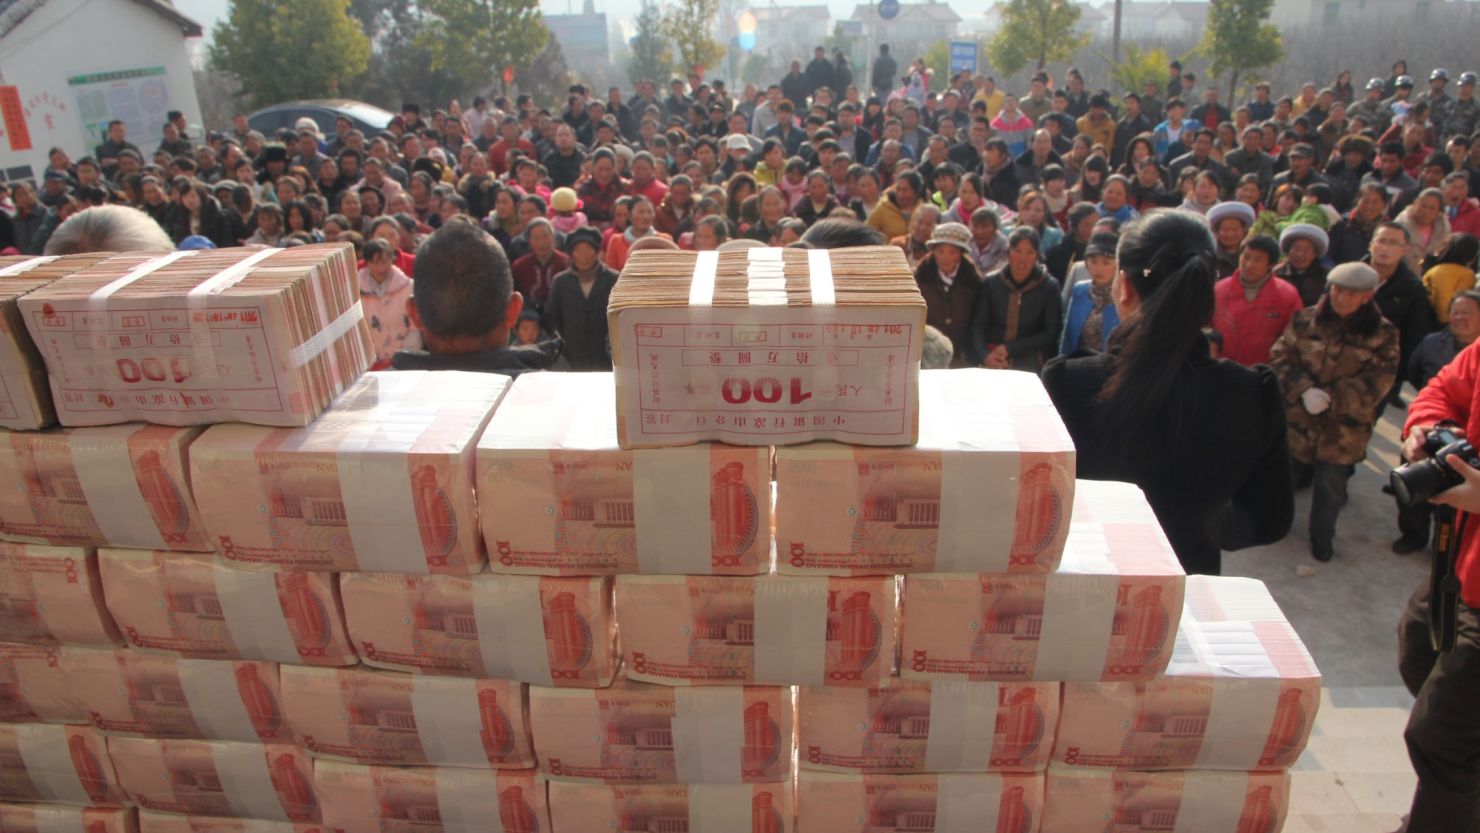 Villagers stand in front of a 'money wall' in Sichuan, China waiting to collect their year-end bonus from their investments on 14 January.